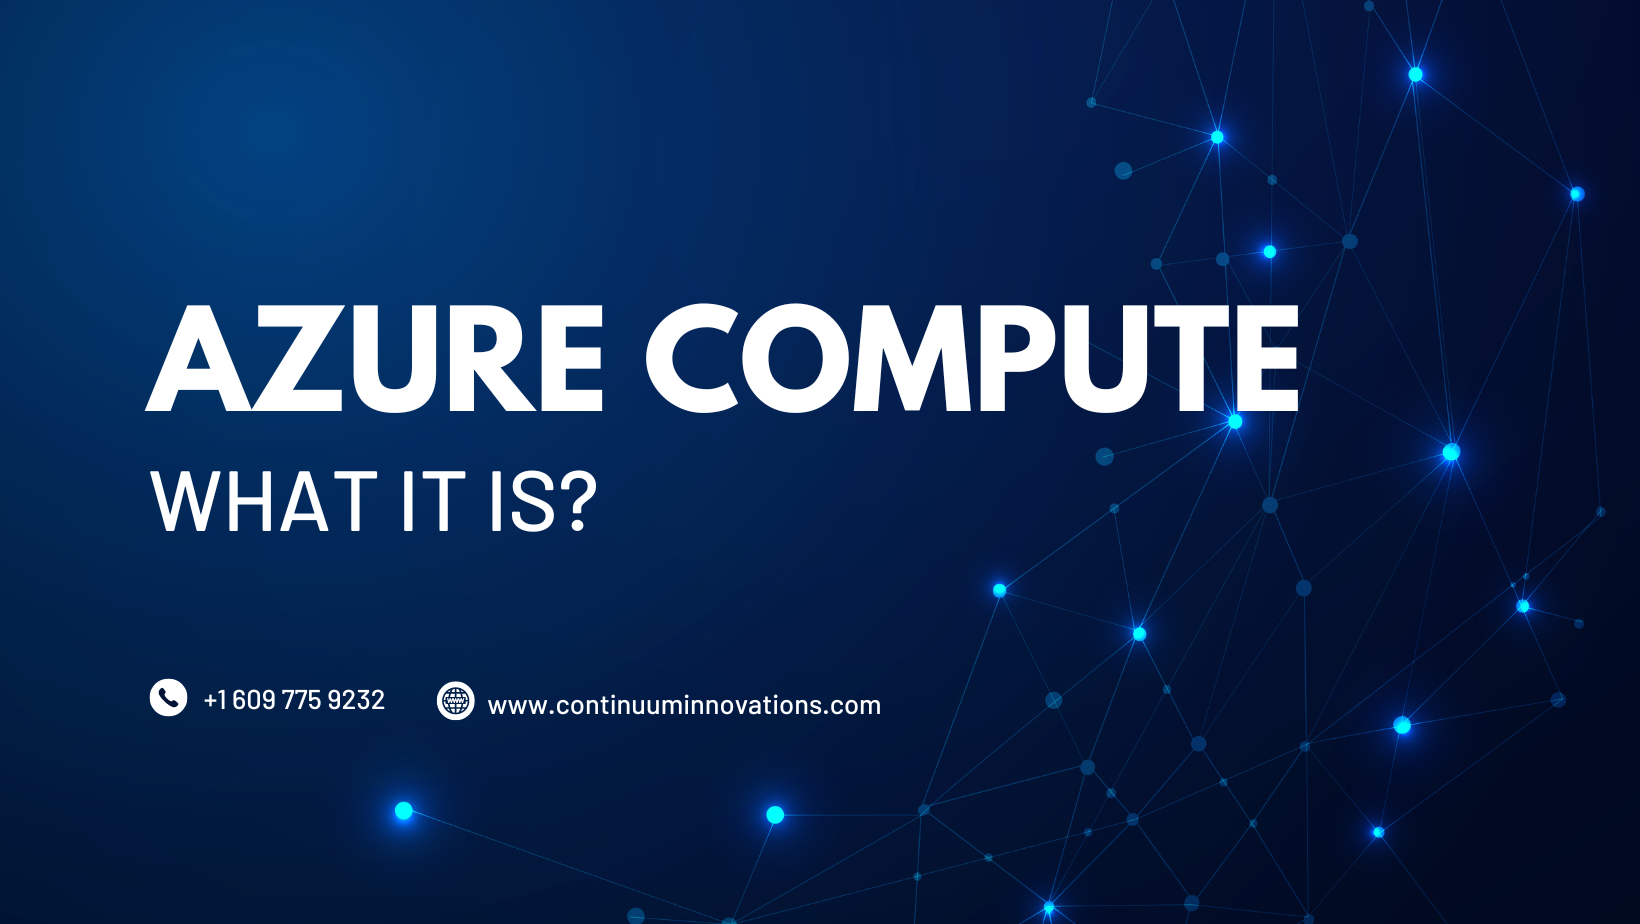 What is Azure compute